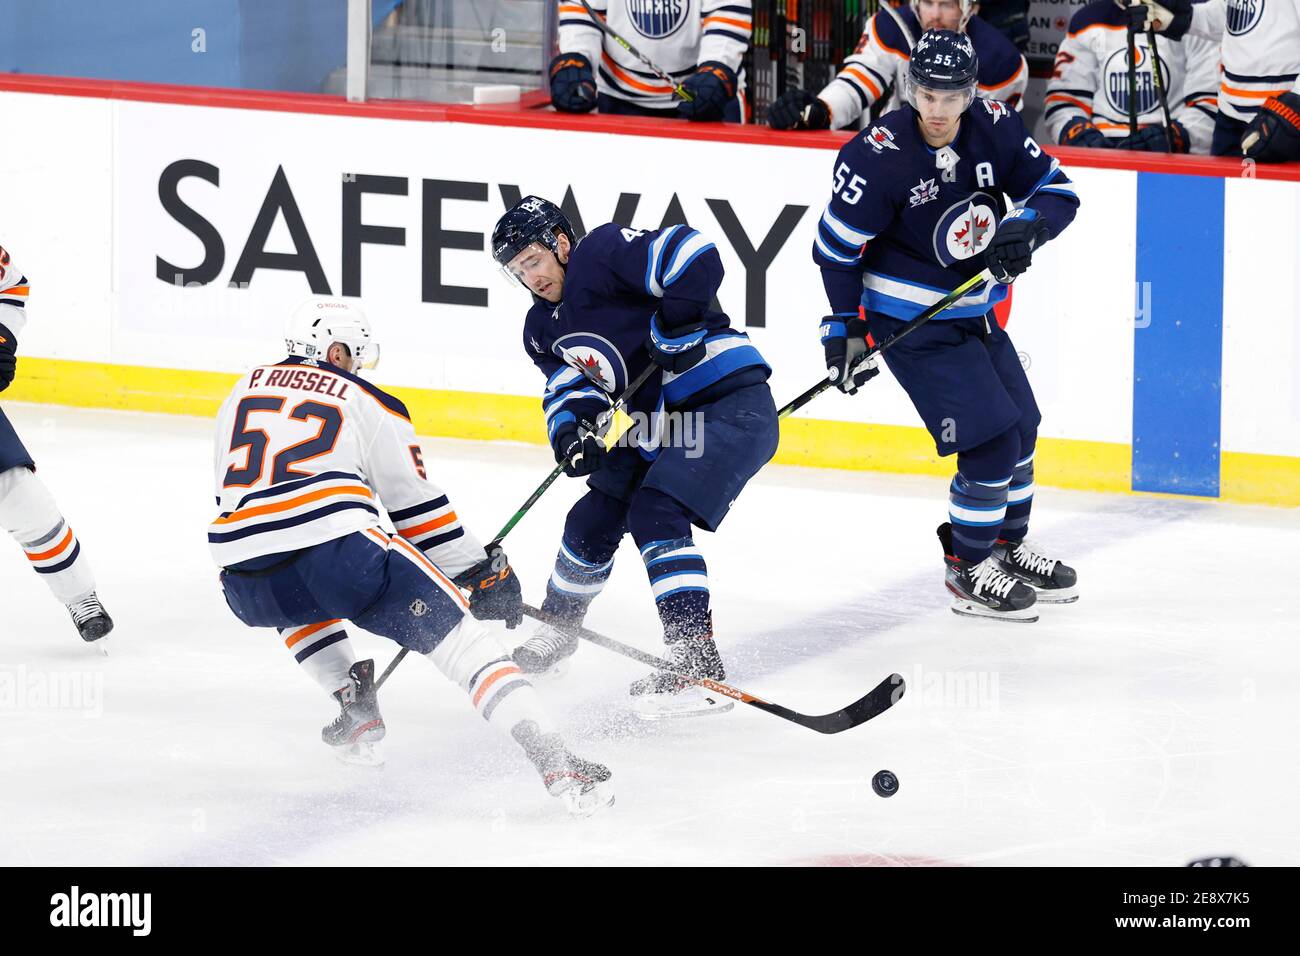 Winnipeg Jets defenseman Neal Pionk (4), Vegas Golden Knights center Nolan  Patrick (41), and Winnipeg Jets center Paul Stastny (25) compete for the  puck during the second period of an NHL hockey